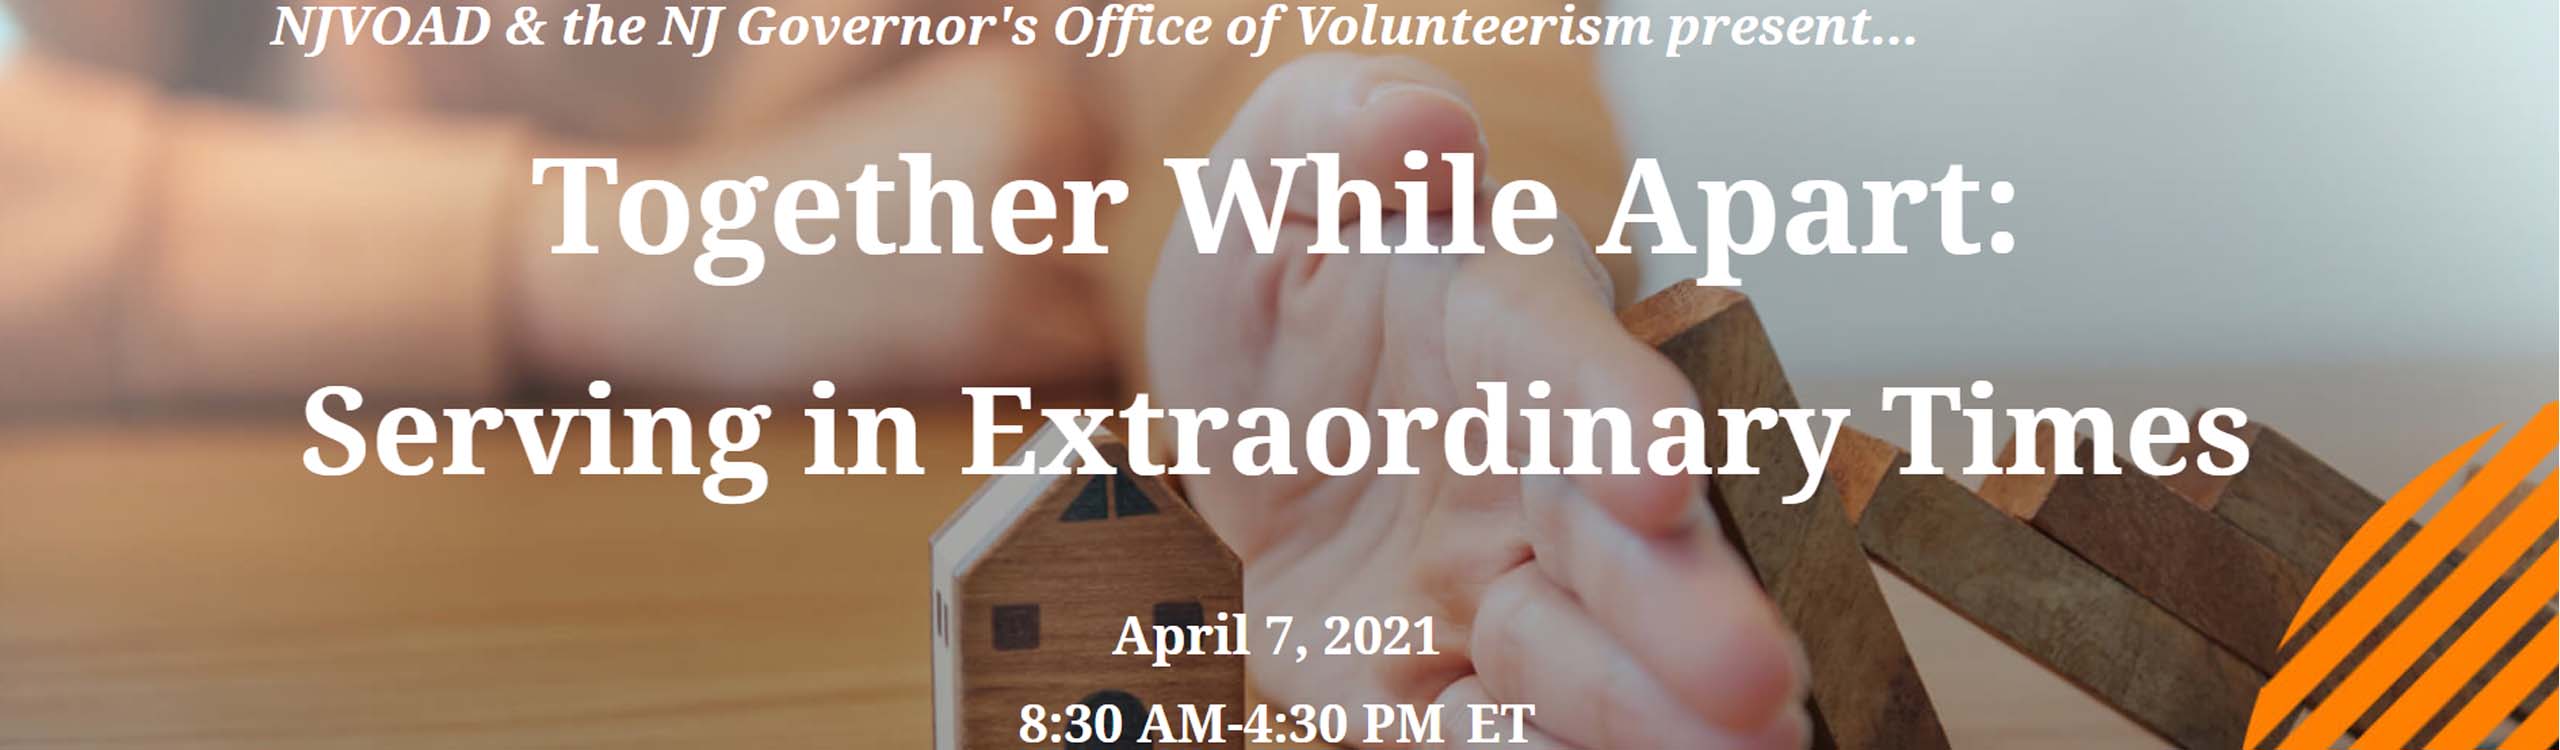 Together While Apart: Serving in Extraordinary Times - April 7, 20201 8:30 am - 4:30 pm ET